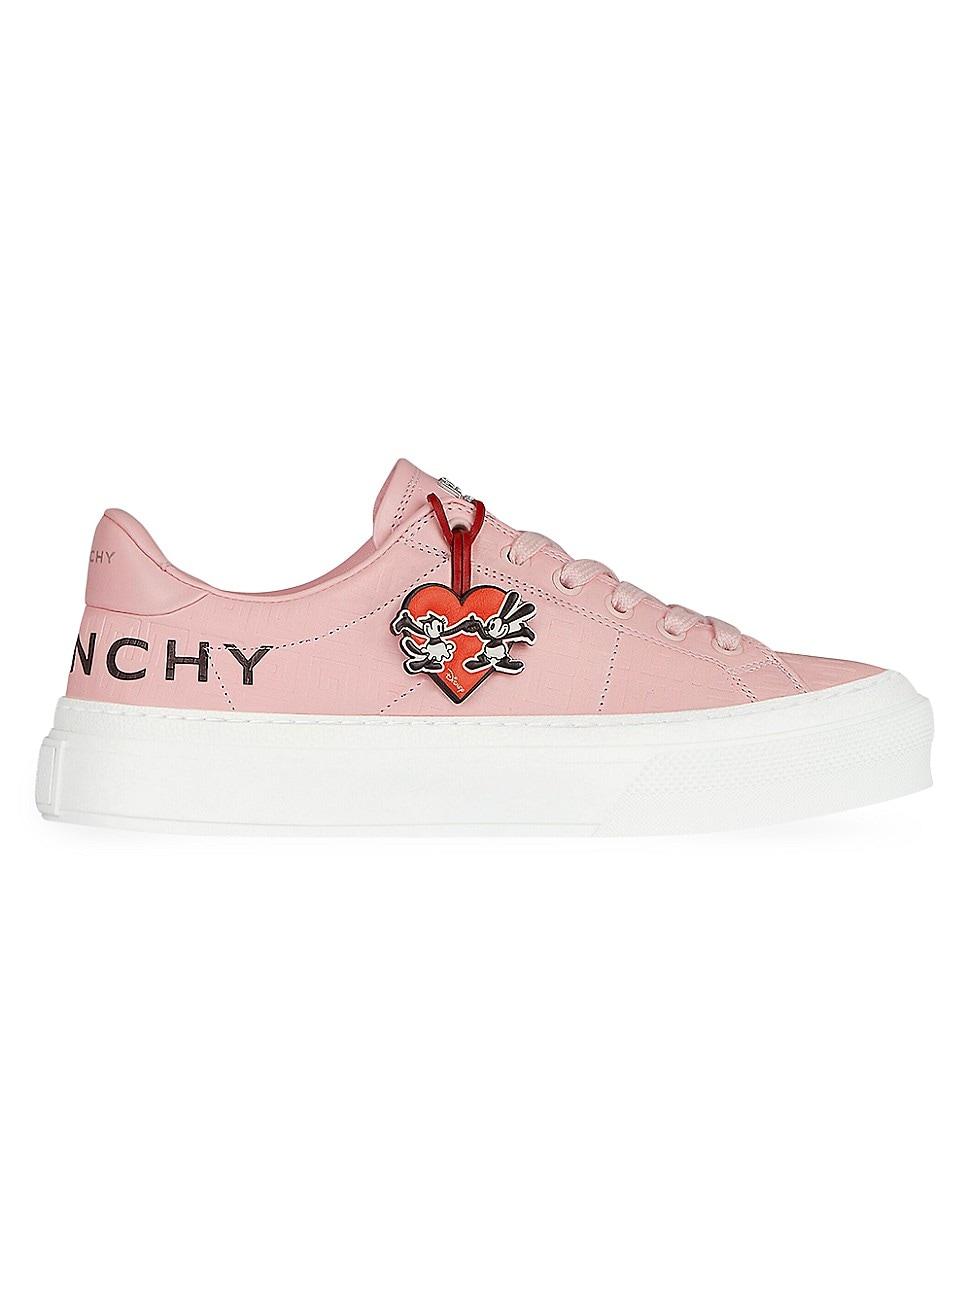 Givenchy City Sport Oswald Sneakers In Leather in Pink | Lyst